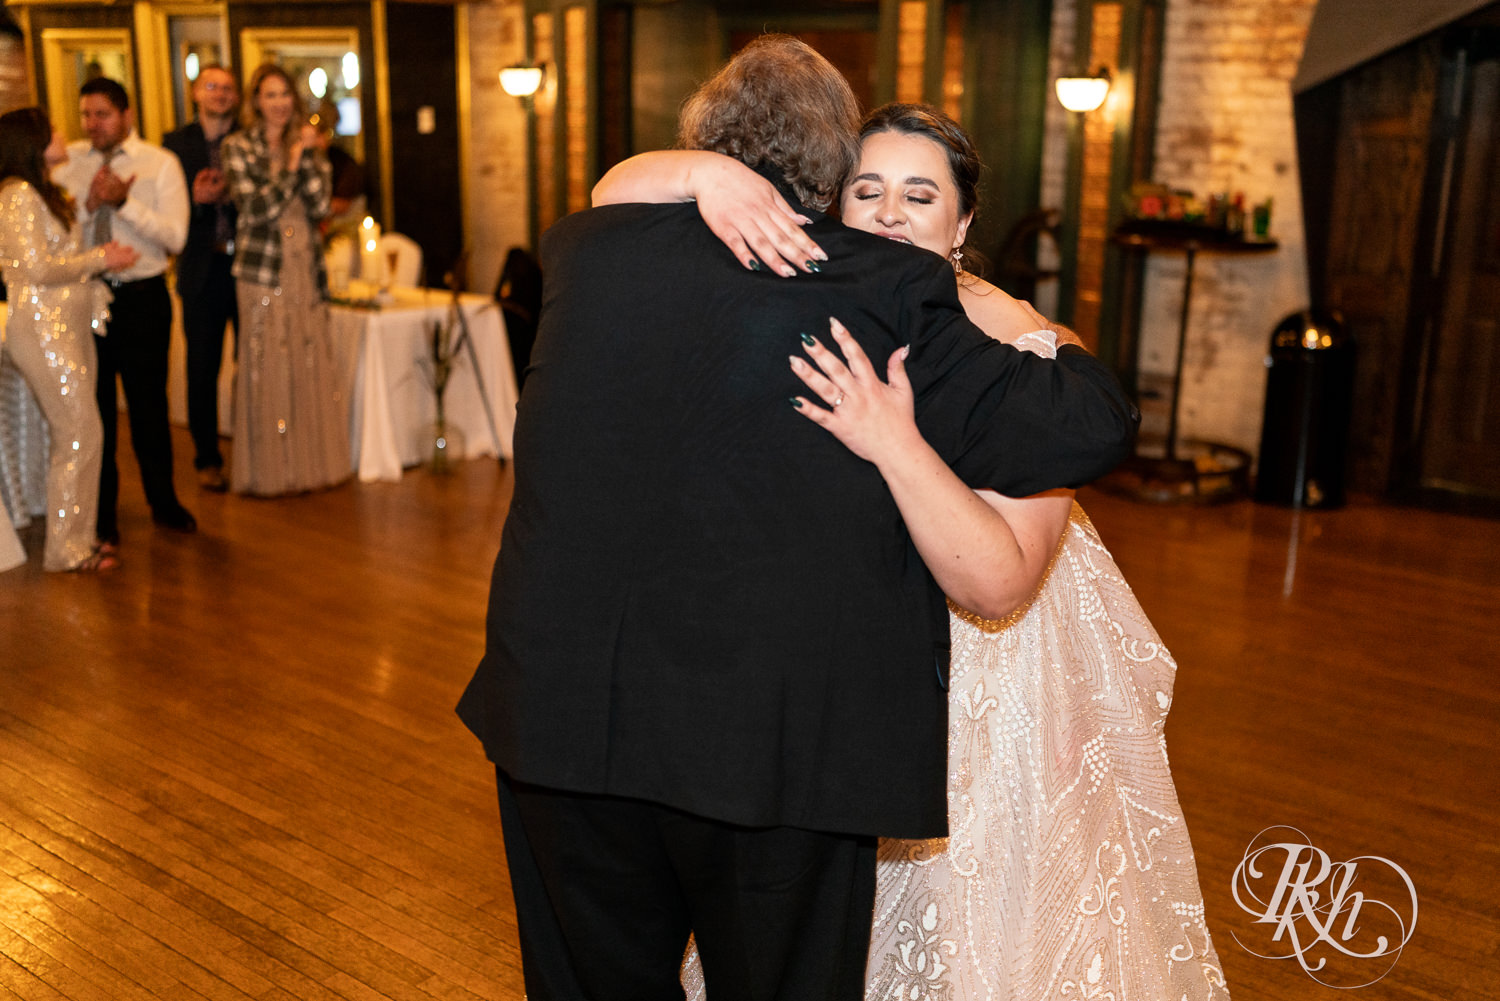 Bride and dad dance at wedding reception at Kellerman's Event Center in White Bear Lake, Minnesota.